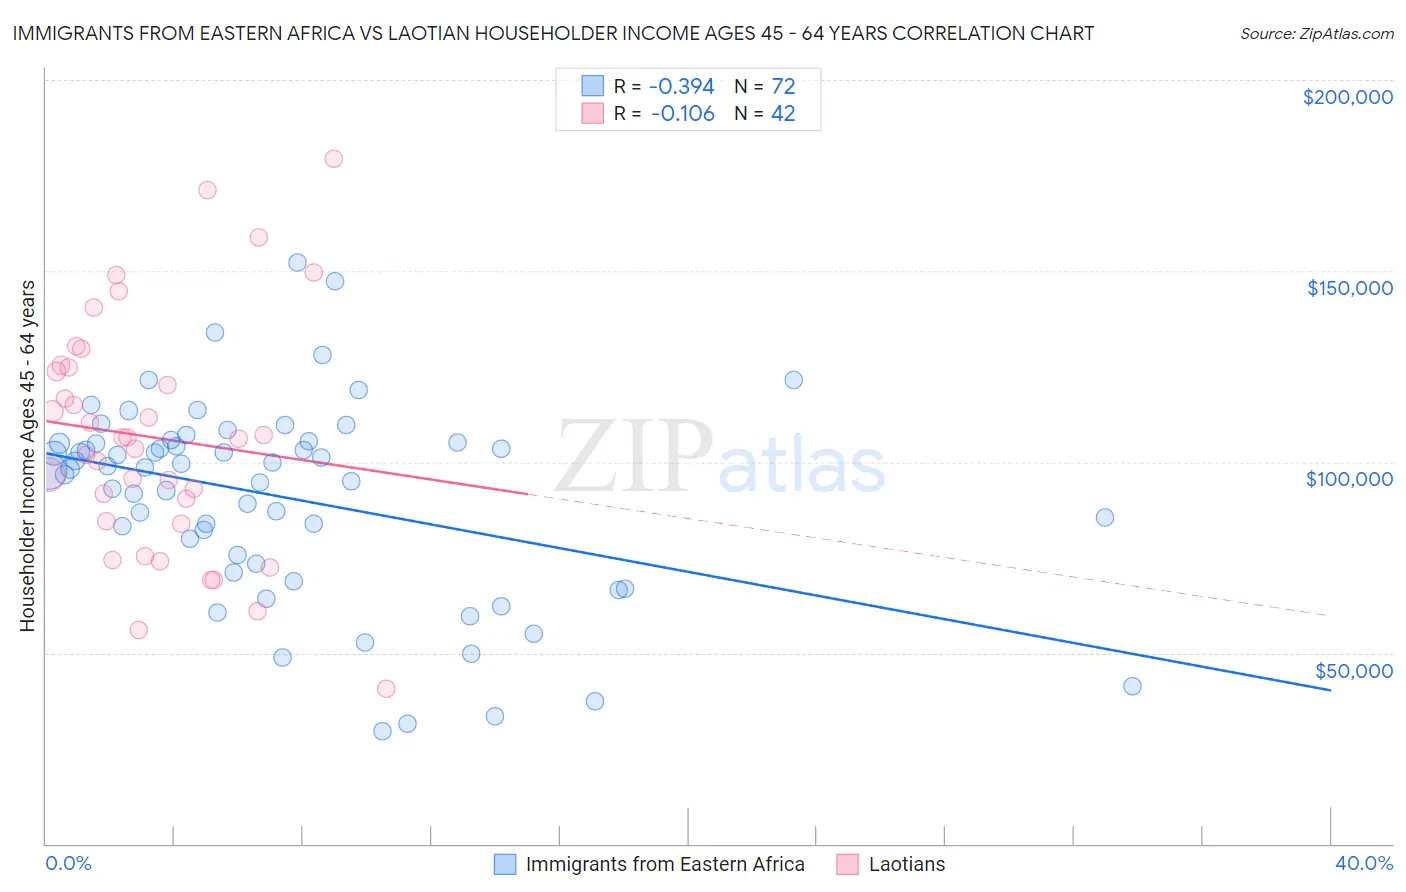 Immigrants from Eastern Africa vs Laotian Householder Income Ages 45 - 64 years